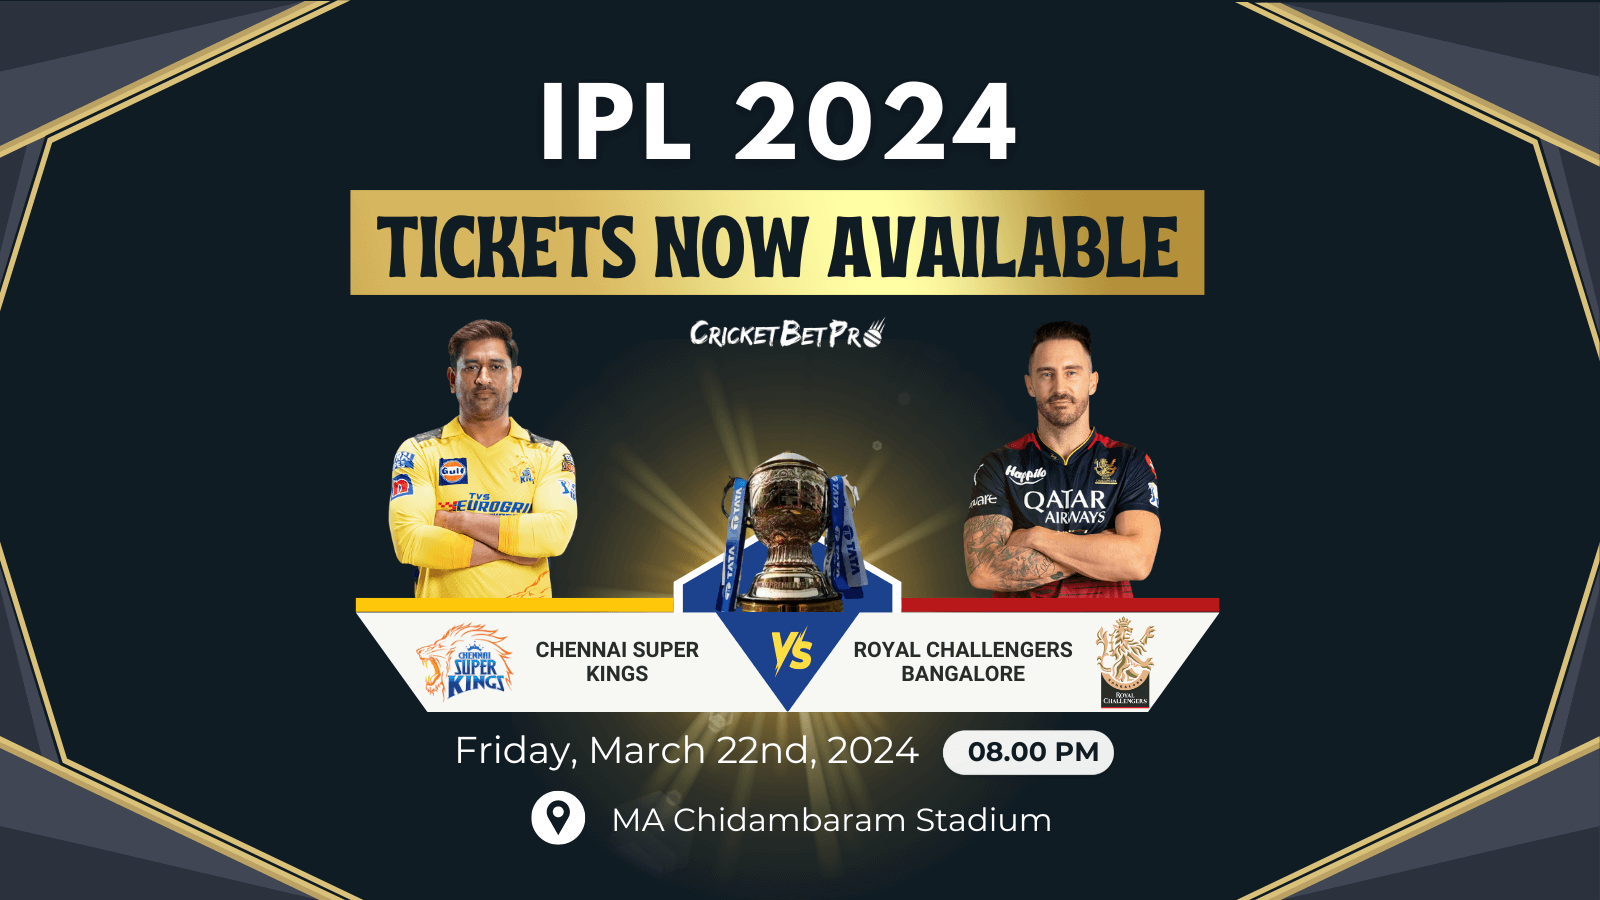 IPL 2024 Tickets Now Available